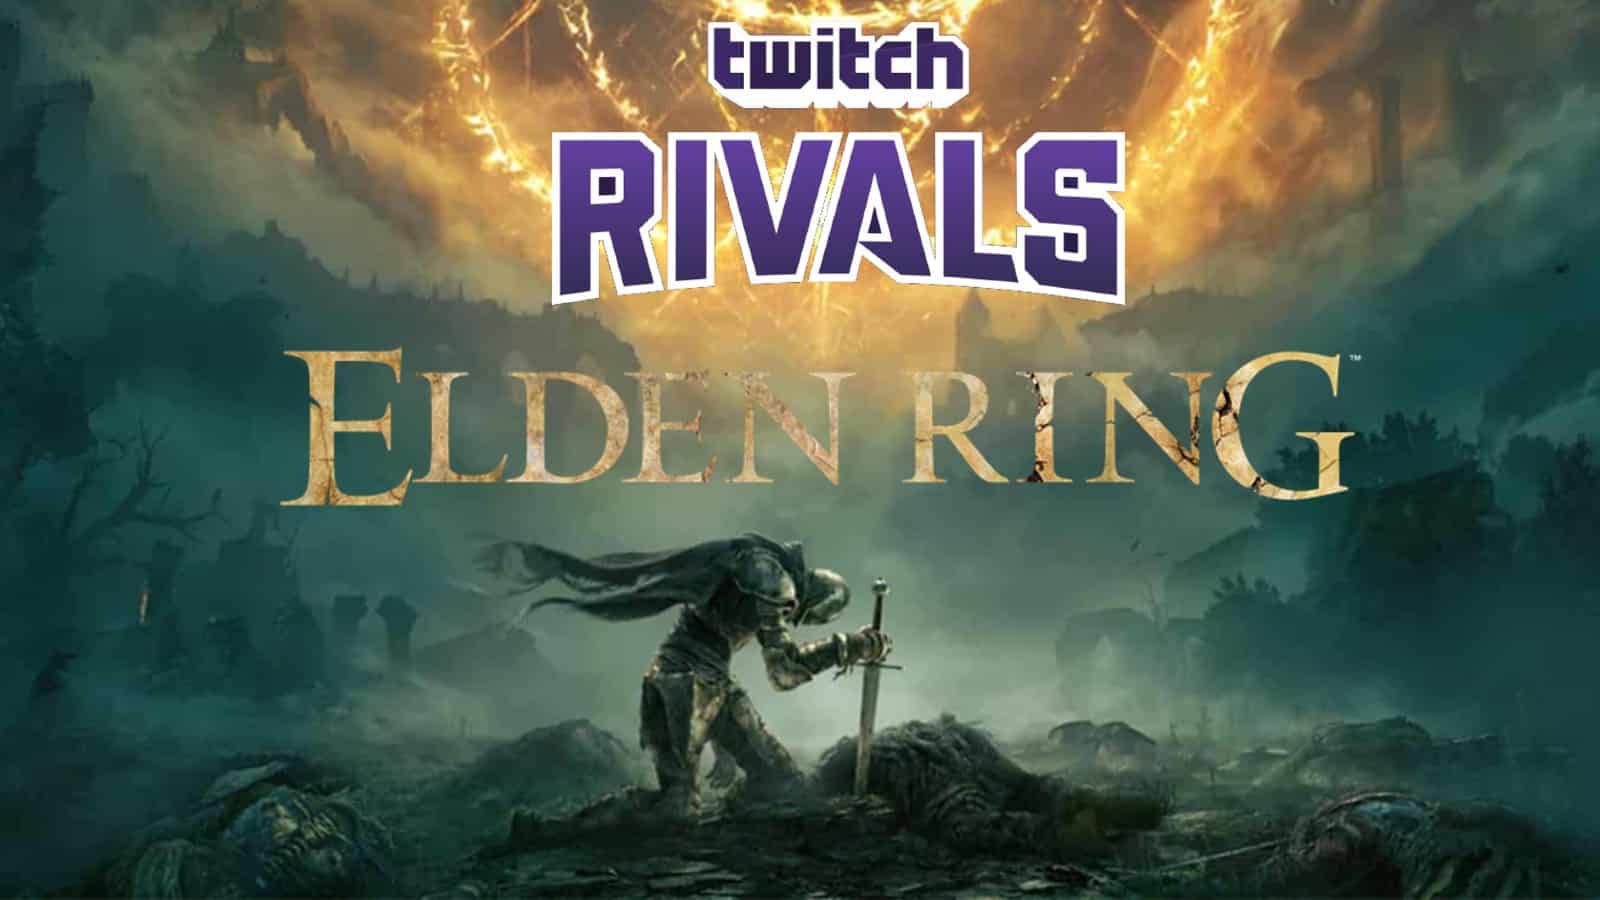 Elden Ring poster with game and Twitch Rivals logo